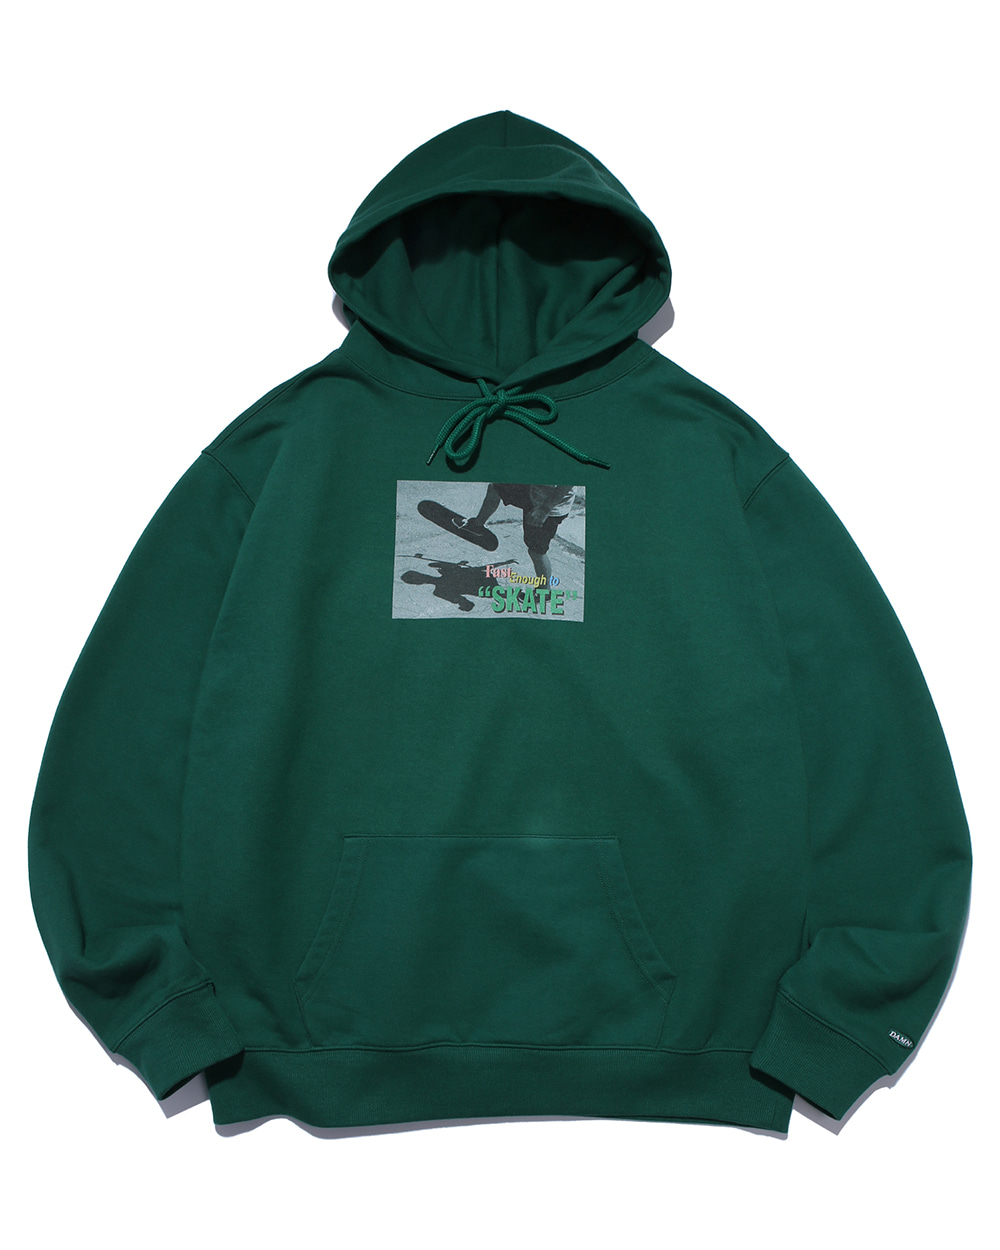 Larry Clark THE SMELL OF US SKATE HOODIE (Green)